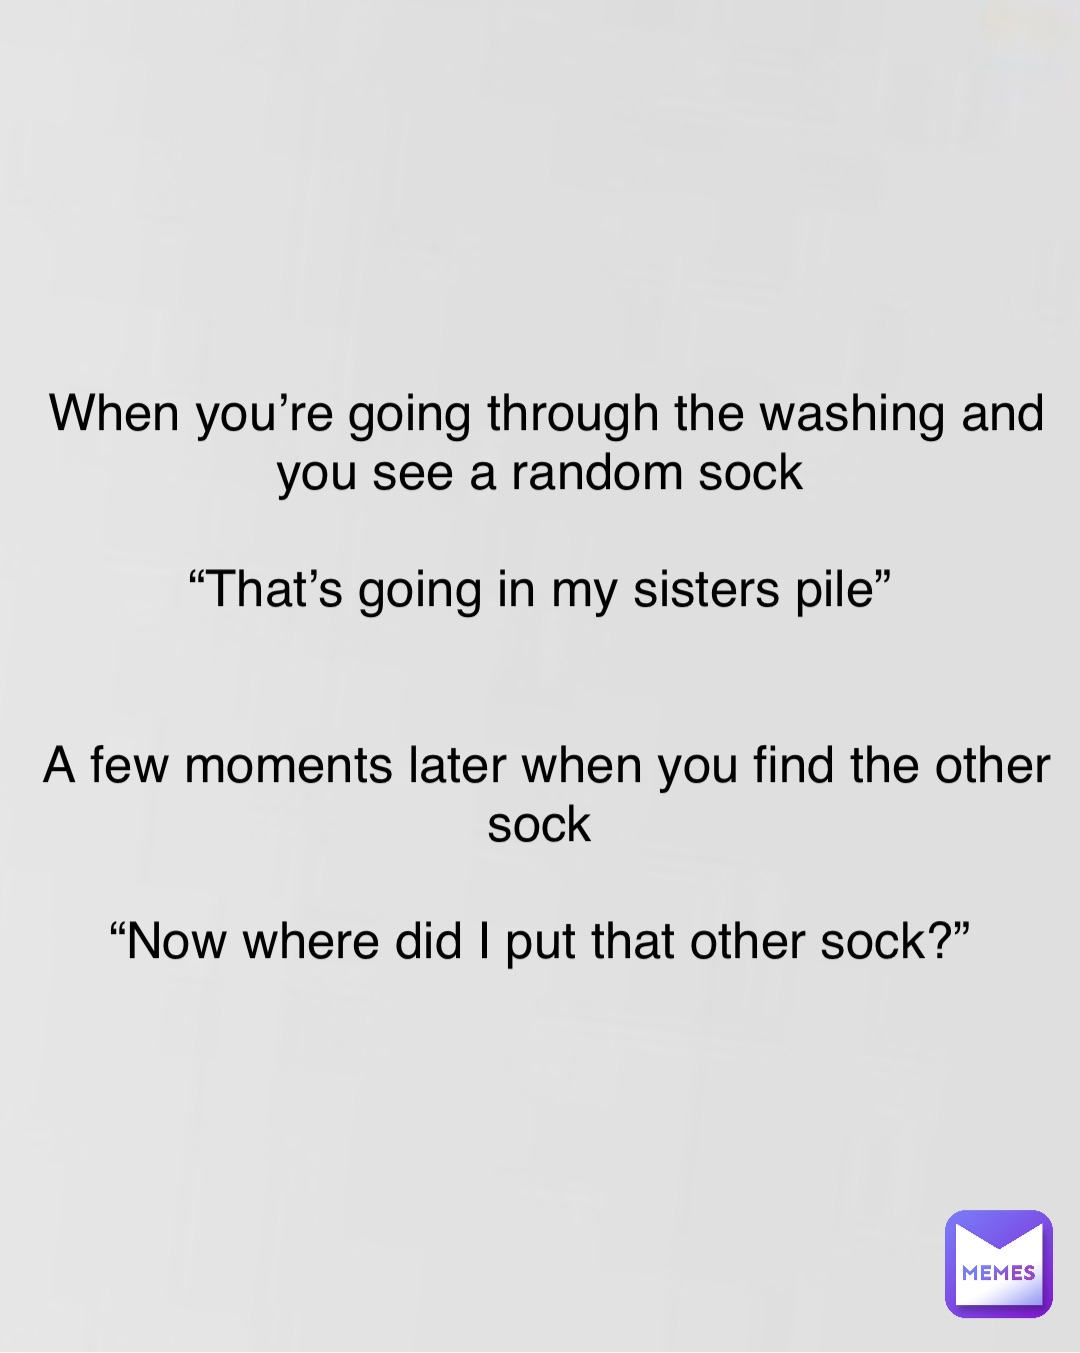 Double tap to edit When you’re going through the washing and you see a random sock

“That’s going in my sisters pile”


A few moments later when you find the other sock

“Now where did I put that other sock?”